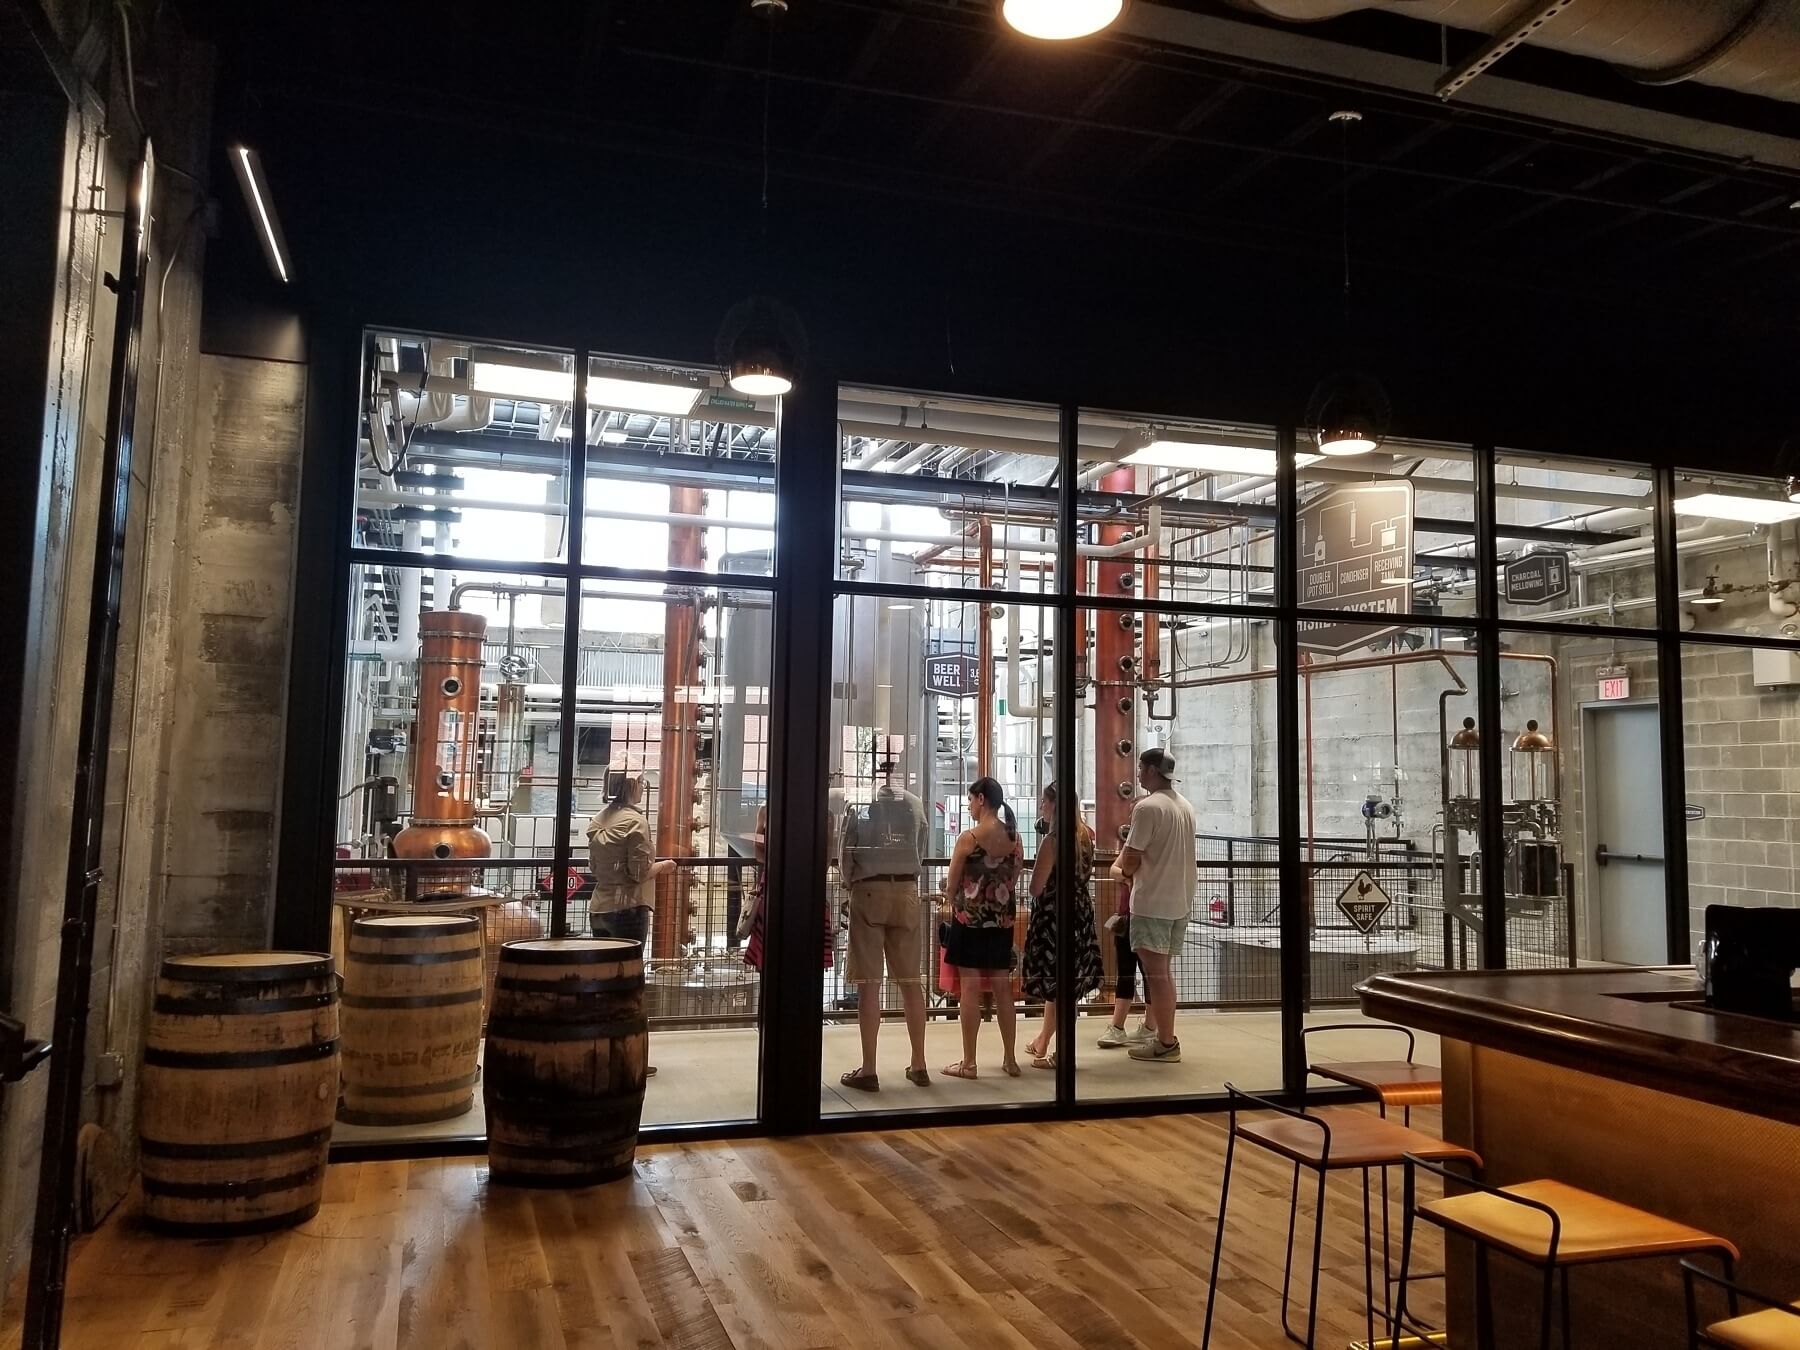 Group of people touring Old Dominick Distillery.